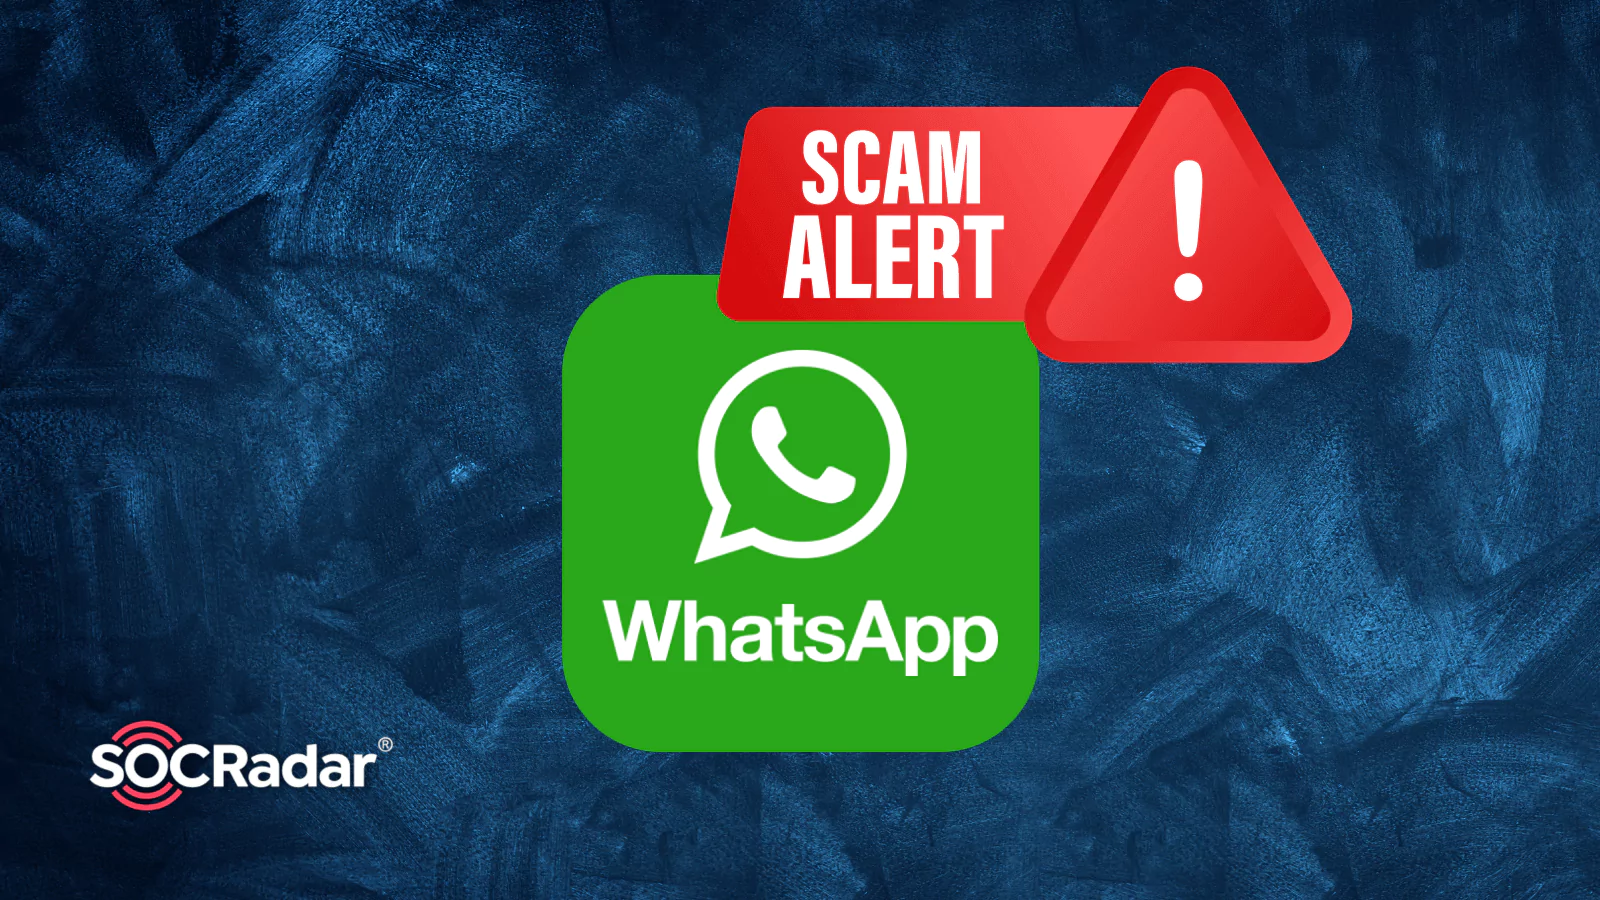 SOCRadar® Cyber Intelligence Inc. | New Playground for Fraudsters: How Do I Get WhatsApp Scam IoCs?